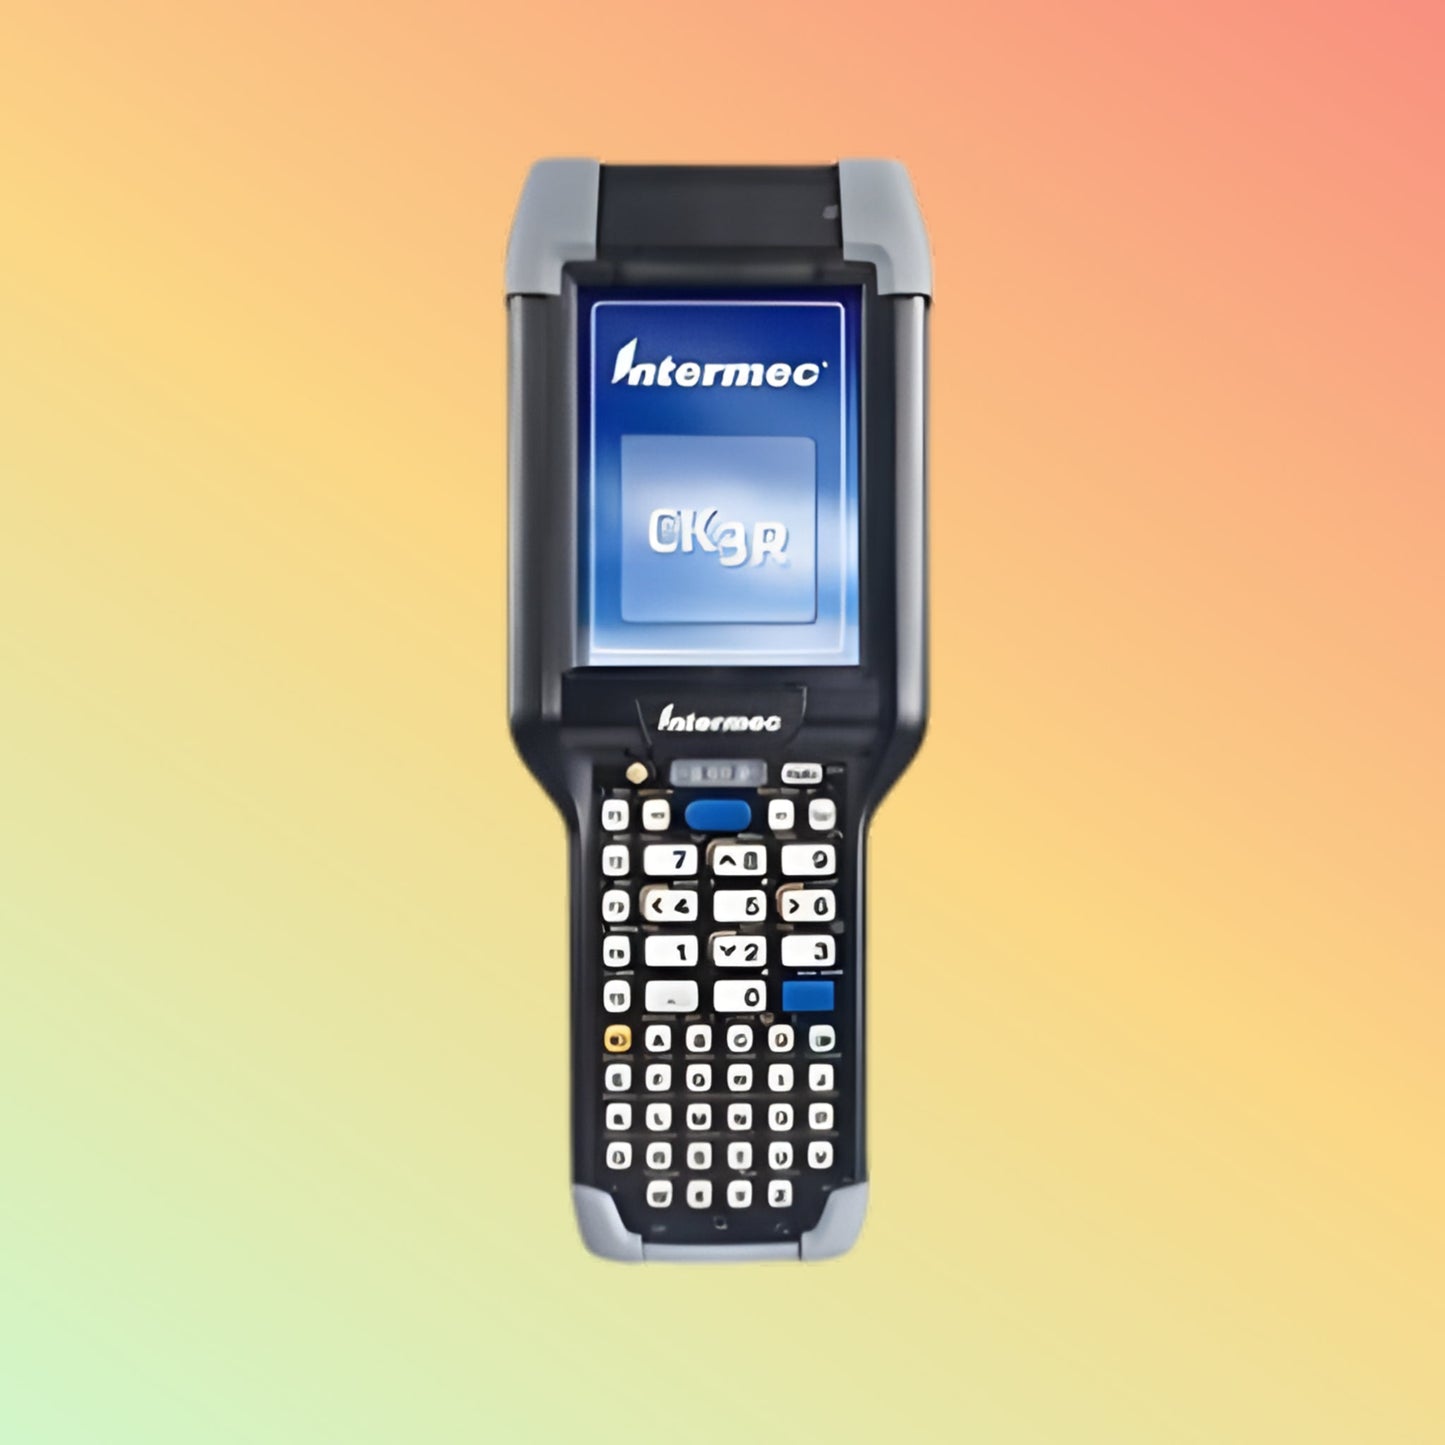 alt="Honeywell CK3R mobile computer for efficient data collection and management"